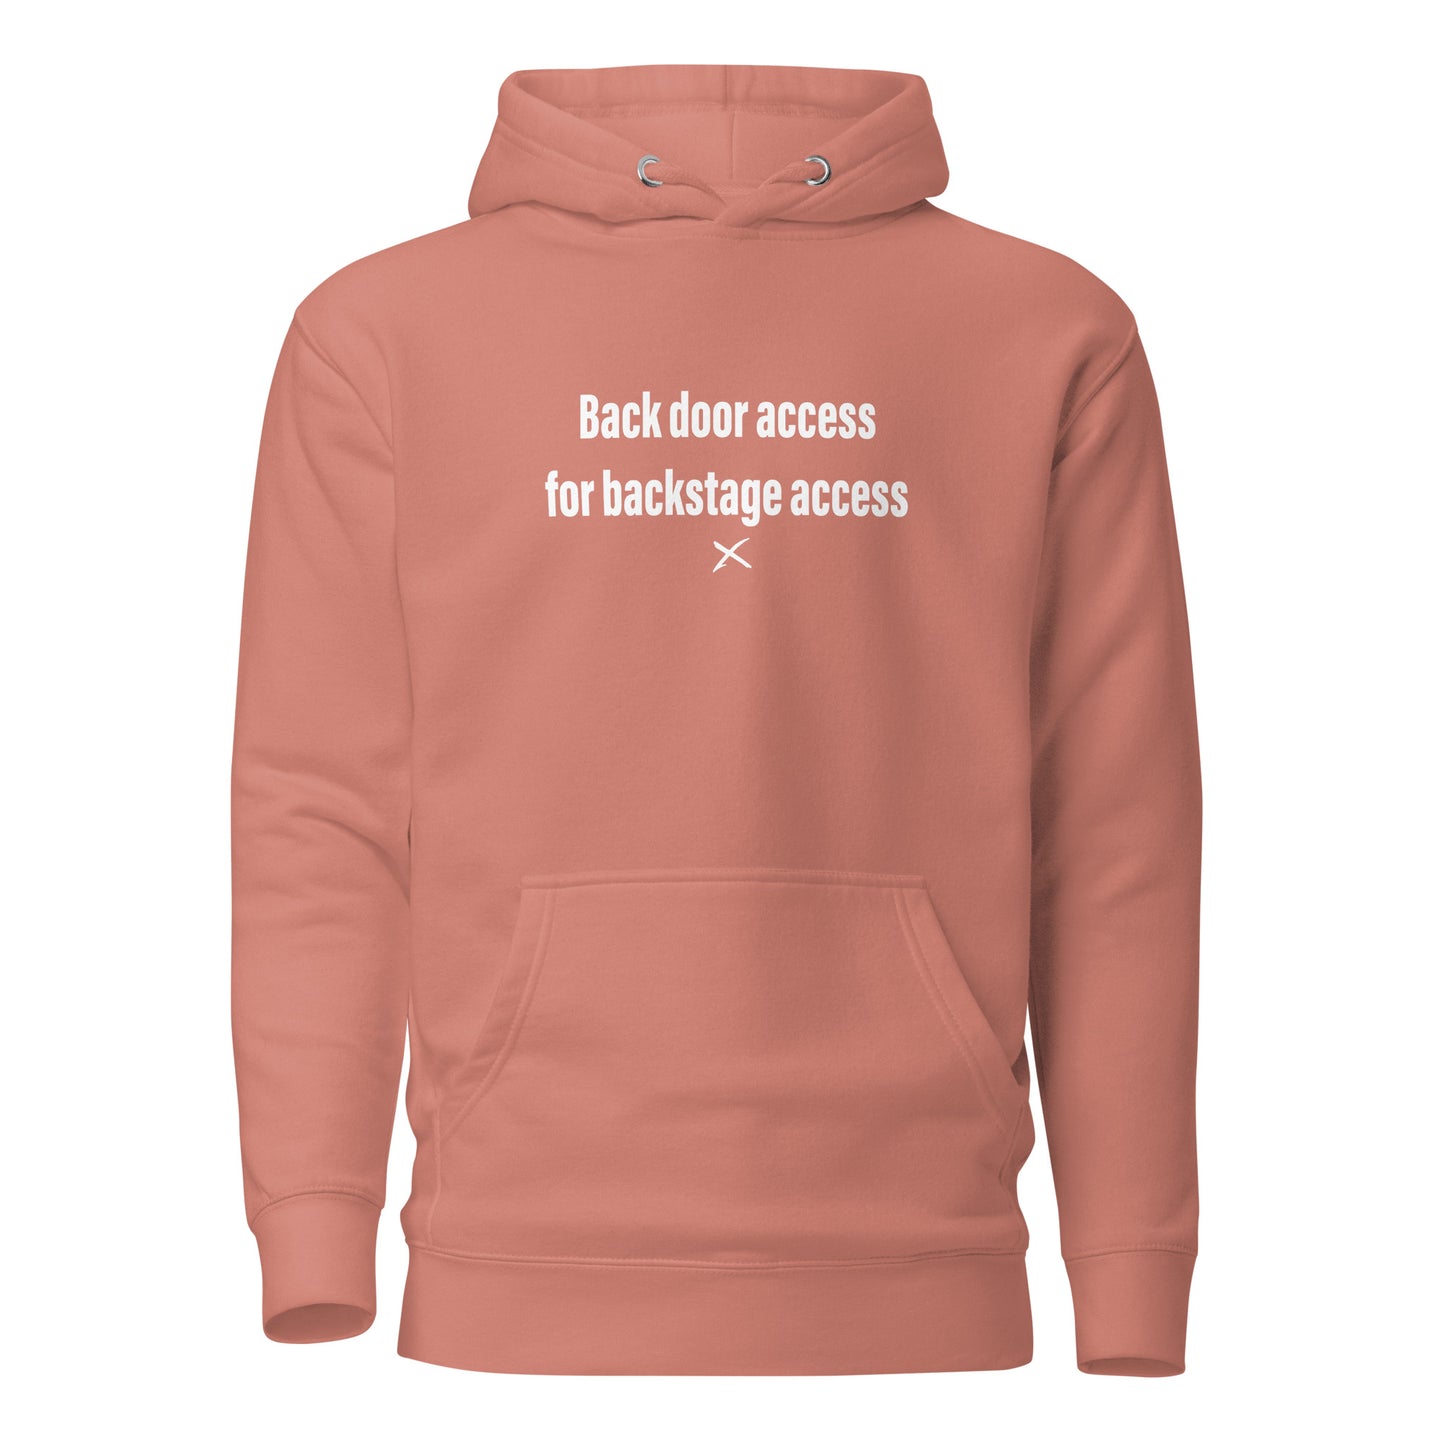 Back door access for backstage access - Hoodie